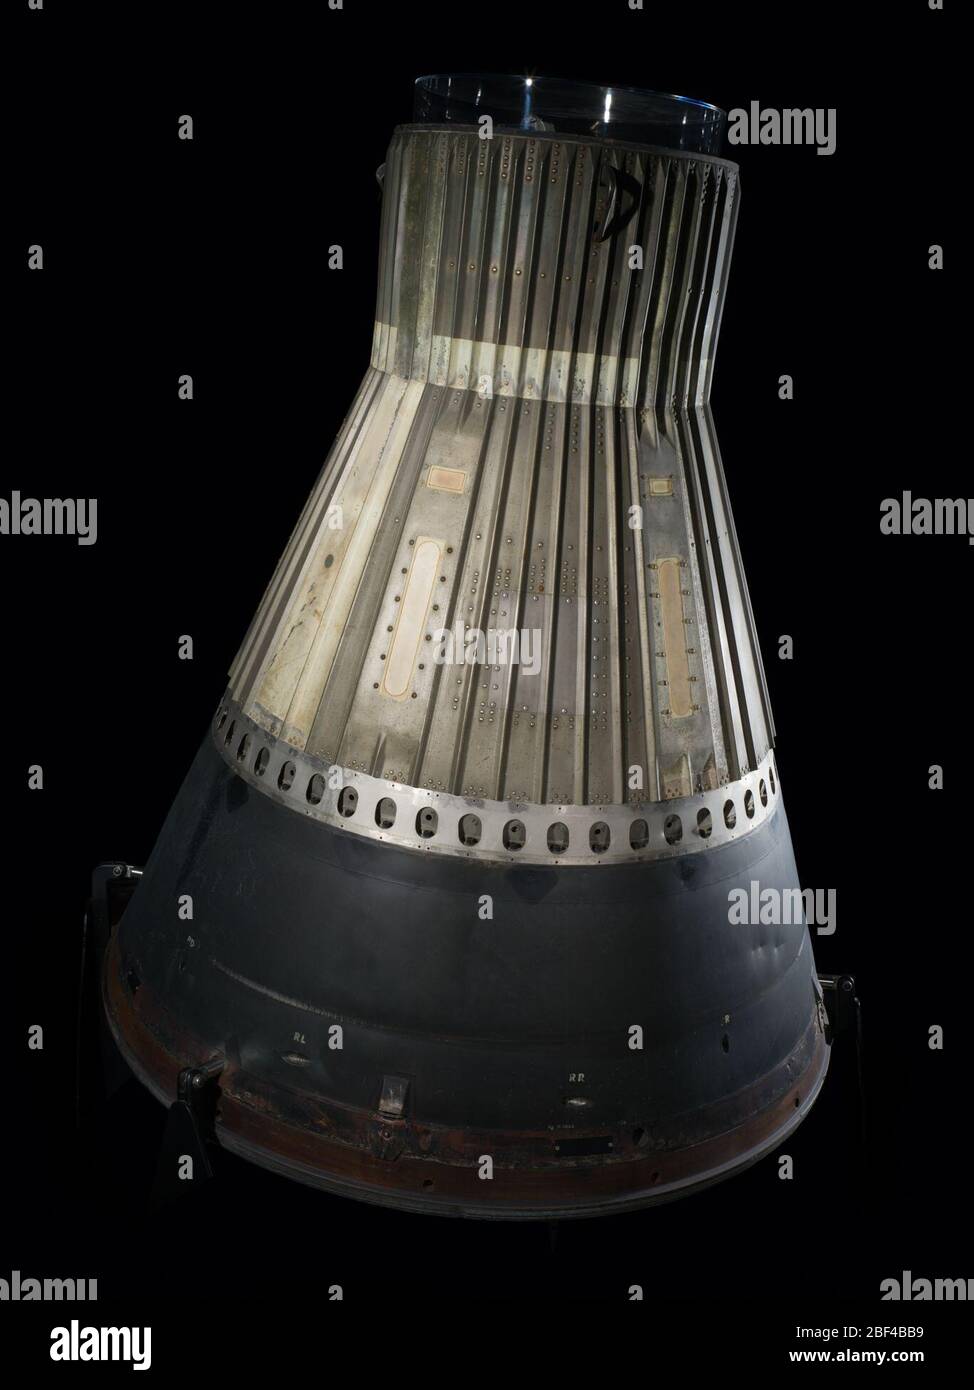 Capsule Mercury. On September 9, 1959, NASA launched this unoccupied Mercury spacecraft from Cape Canaveral, Florida, on a suborbital flight that lasted 13 minutes. Its launch was the second in the Mercury program and the first using an Atlas booster. Stock Photo